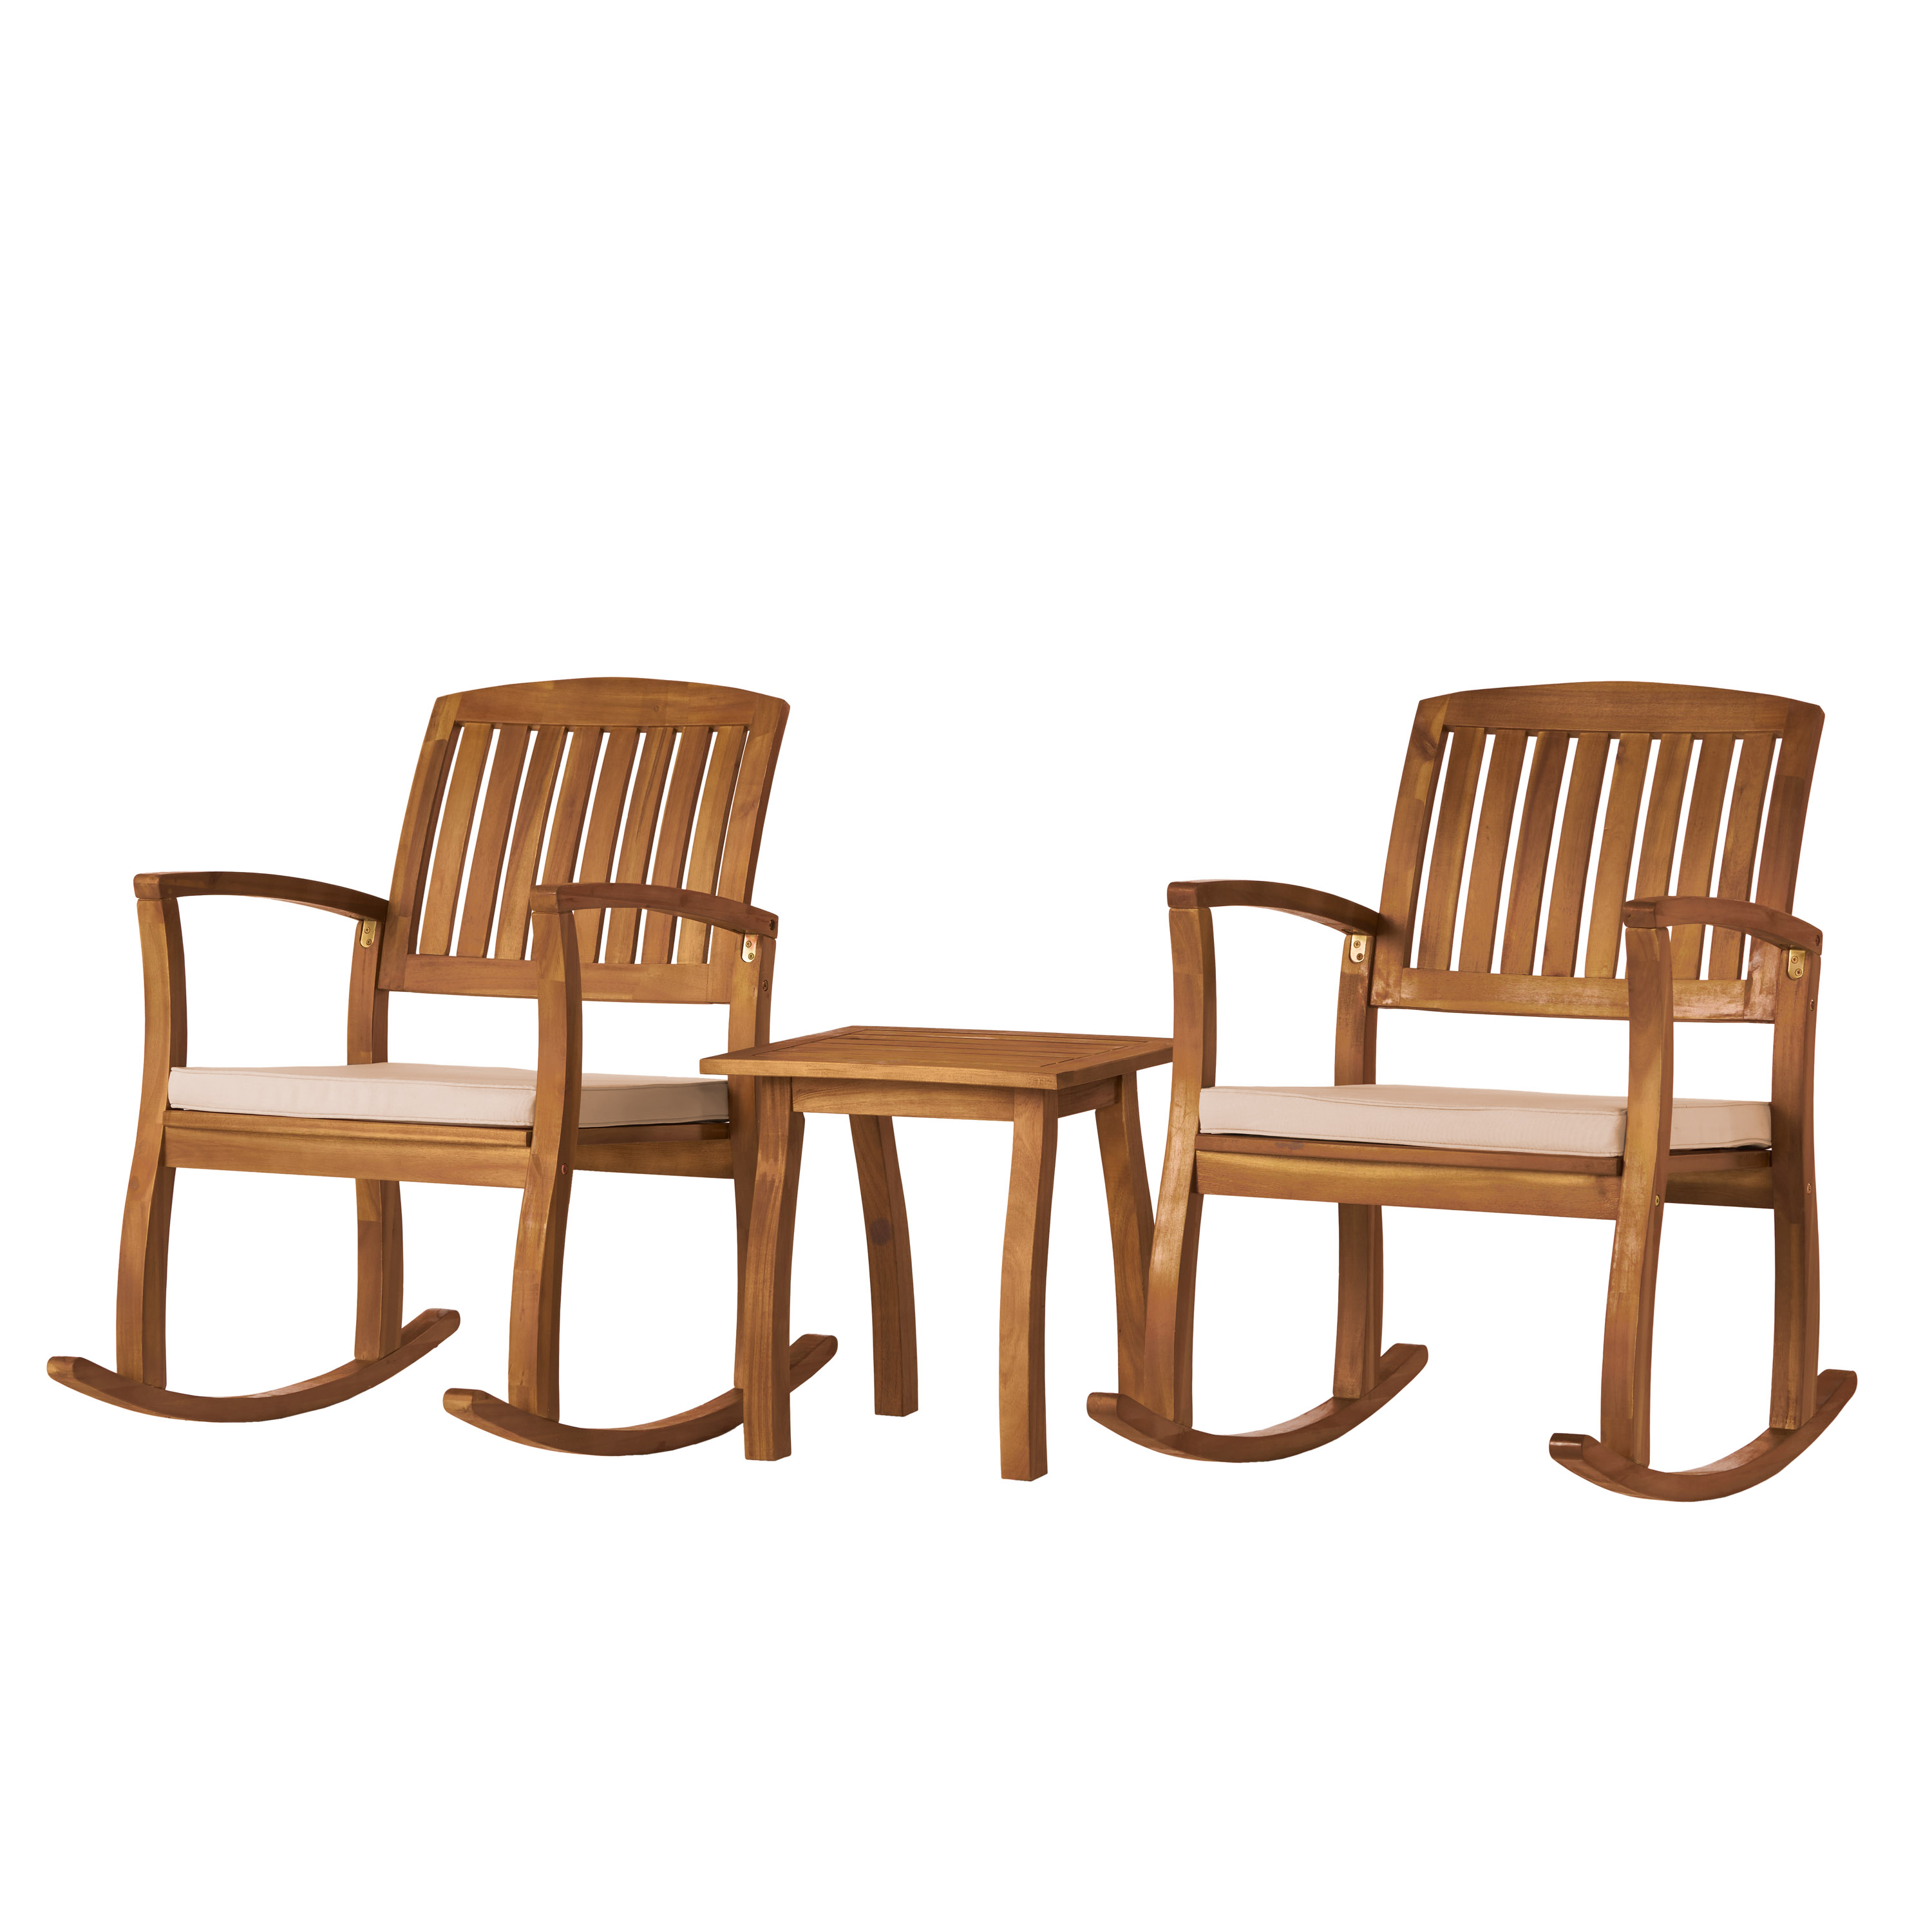 Hampton Acacia Rocking Chair with Cushion, Set of 2, and Acacia Accent Table, Teak Finish - image 2 of 12